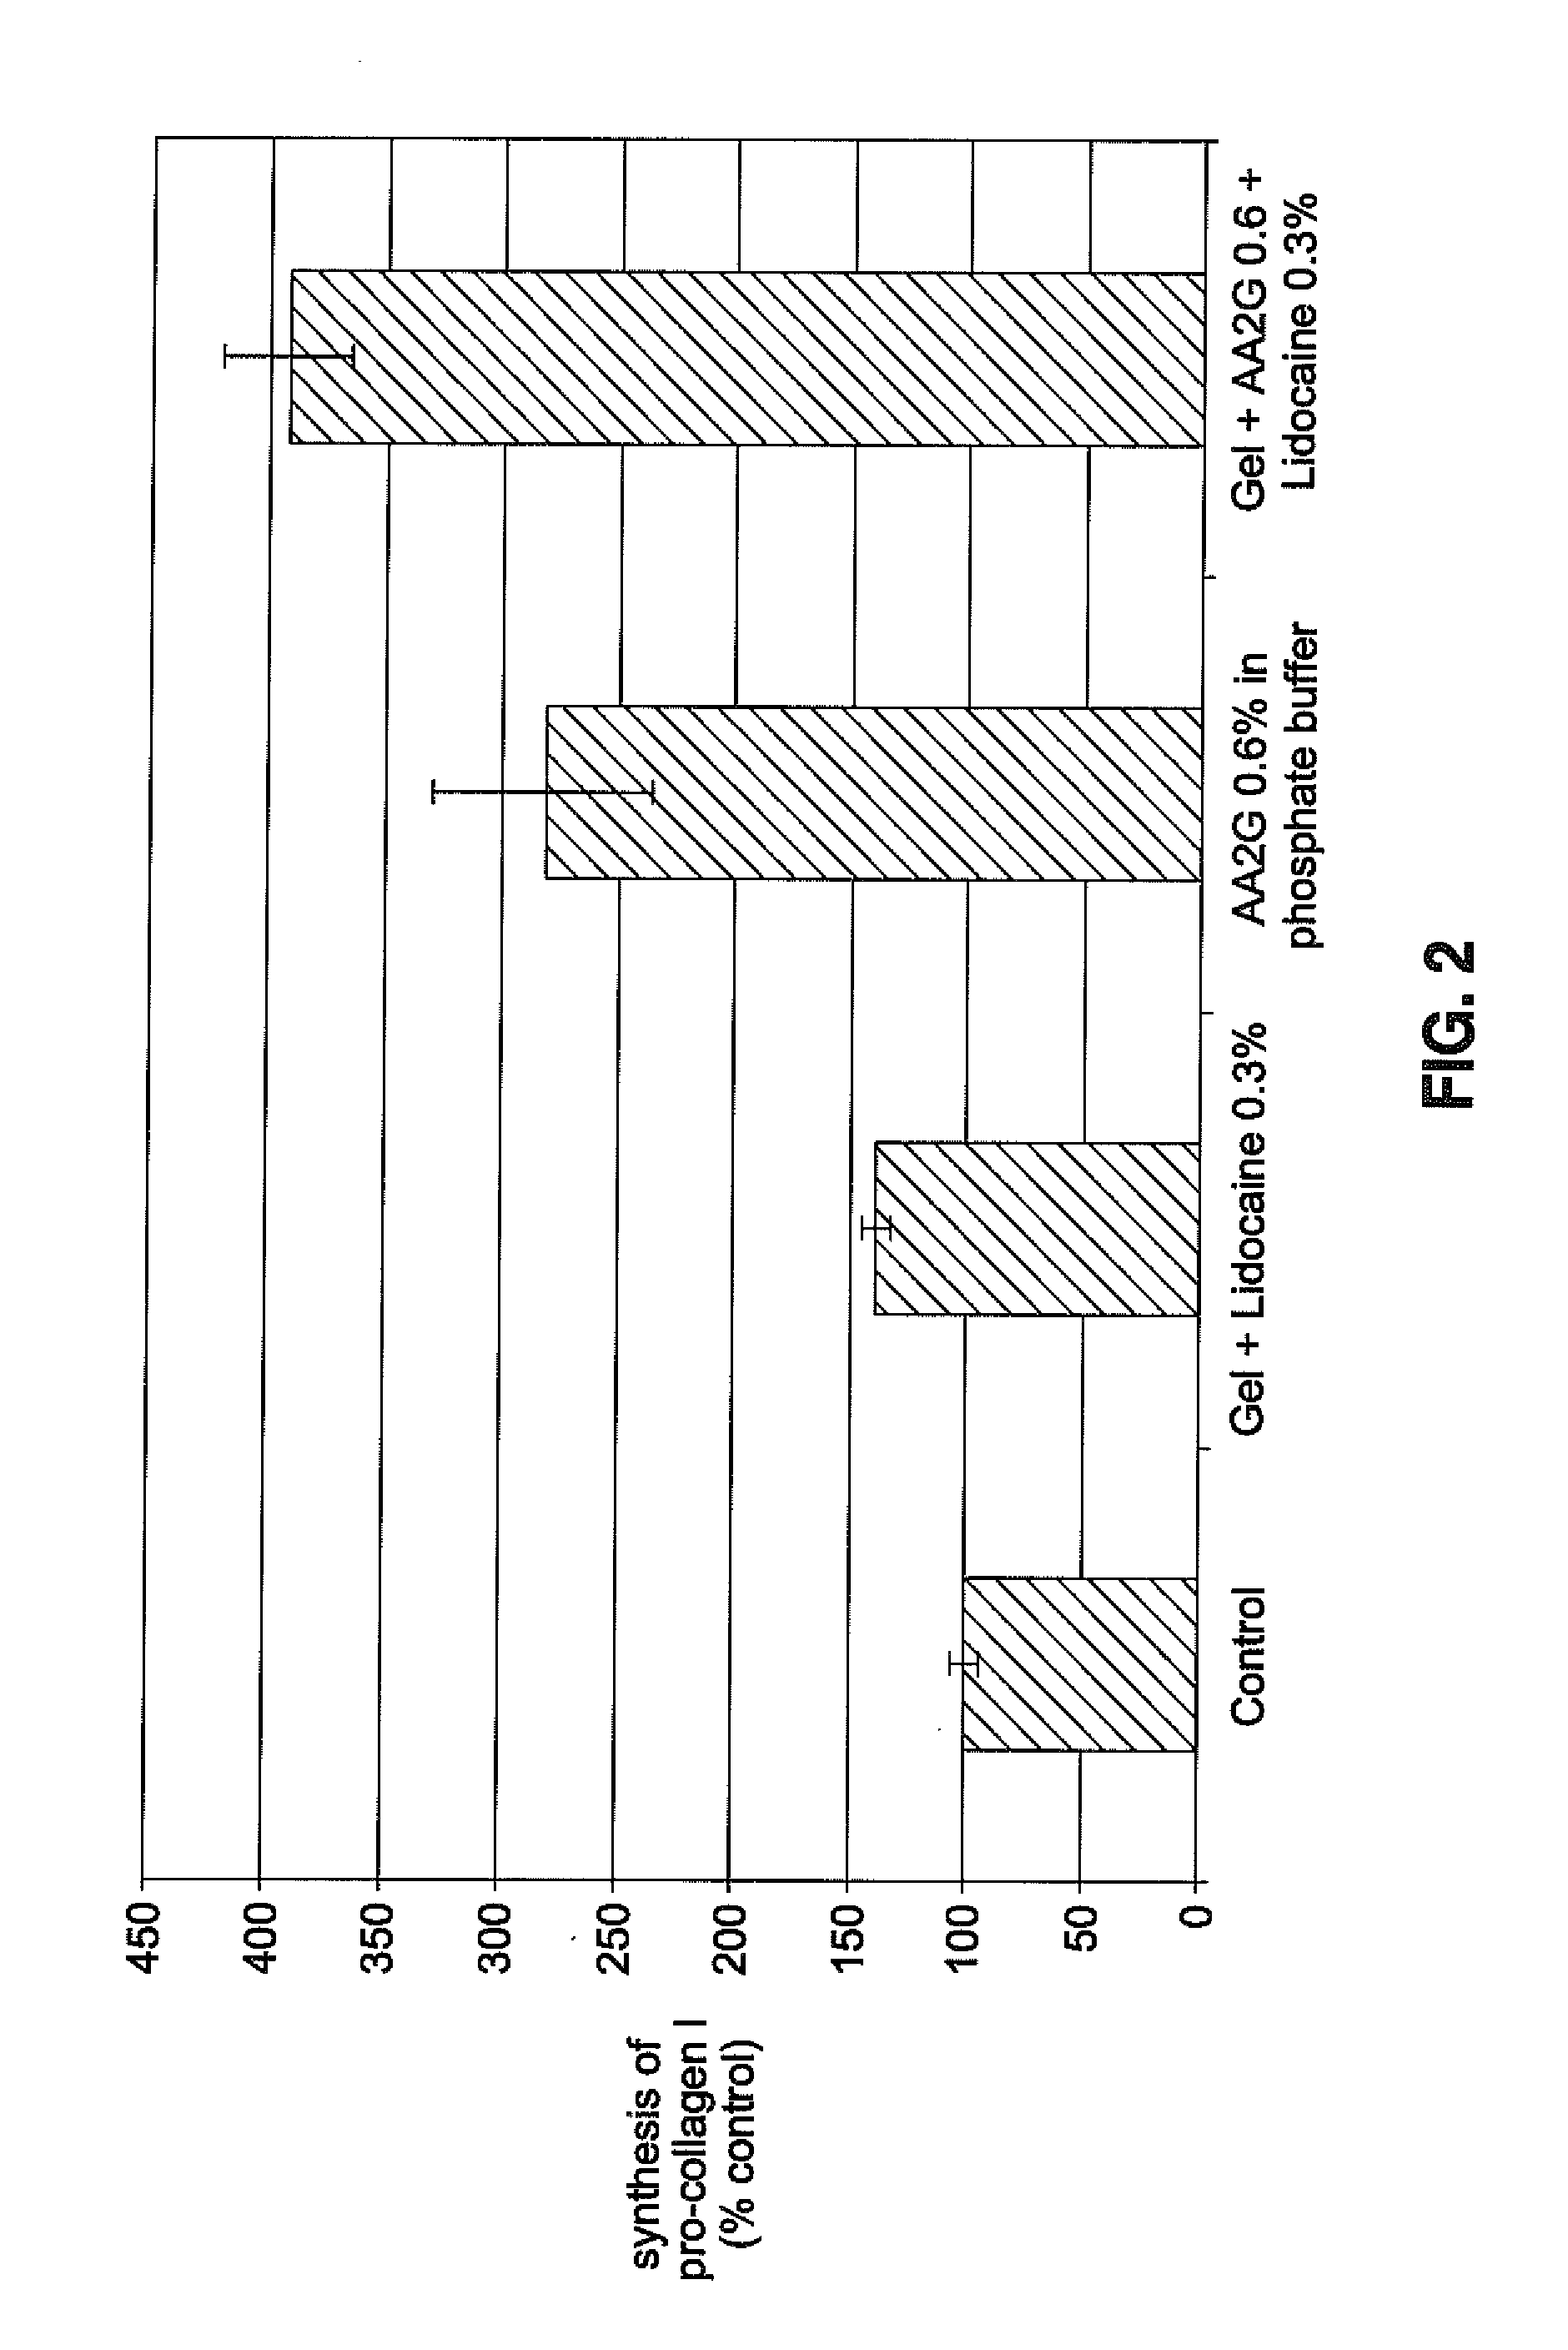 Hyaluronic acid compositions for dermatological use